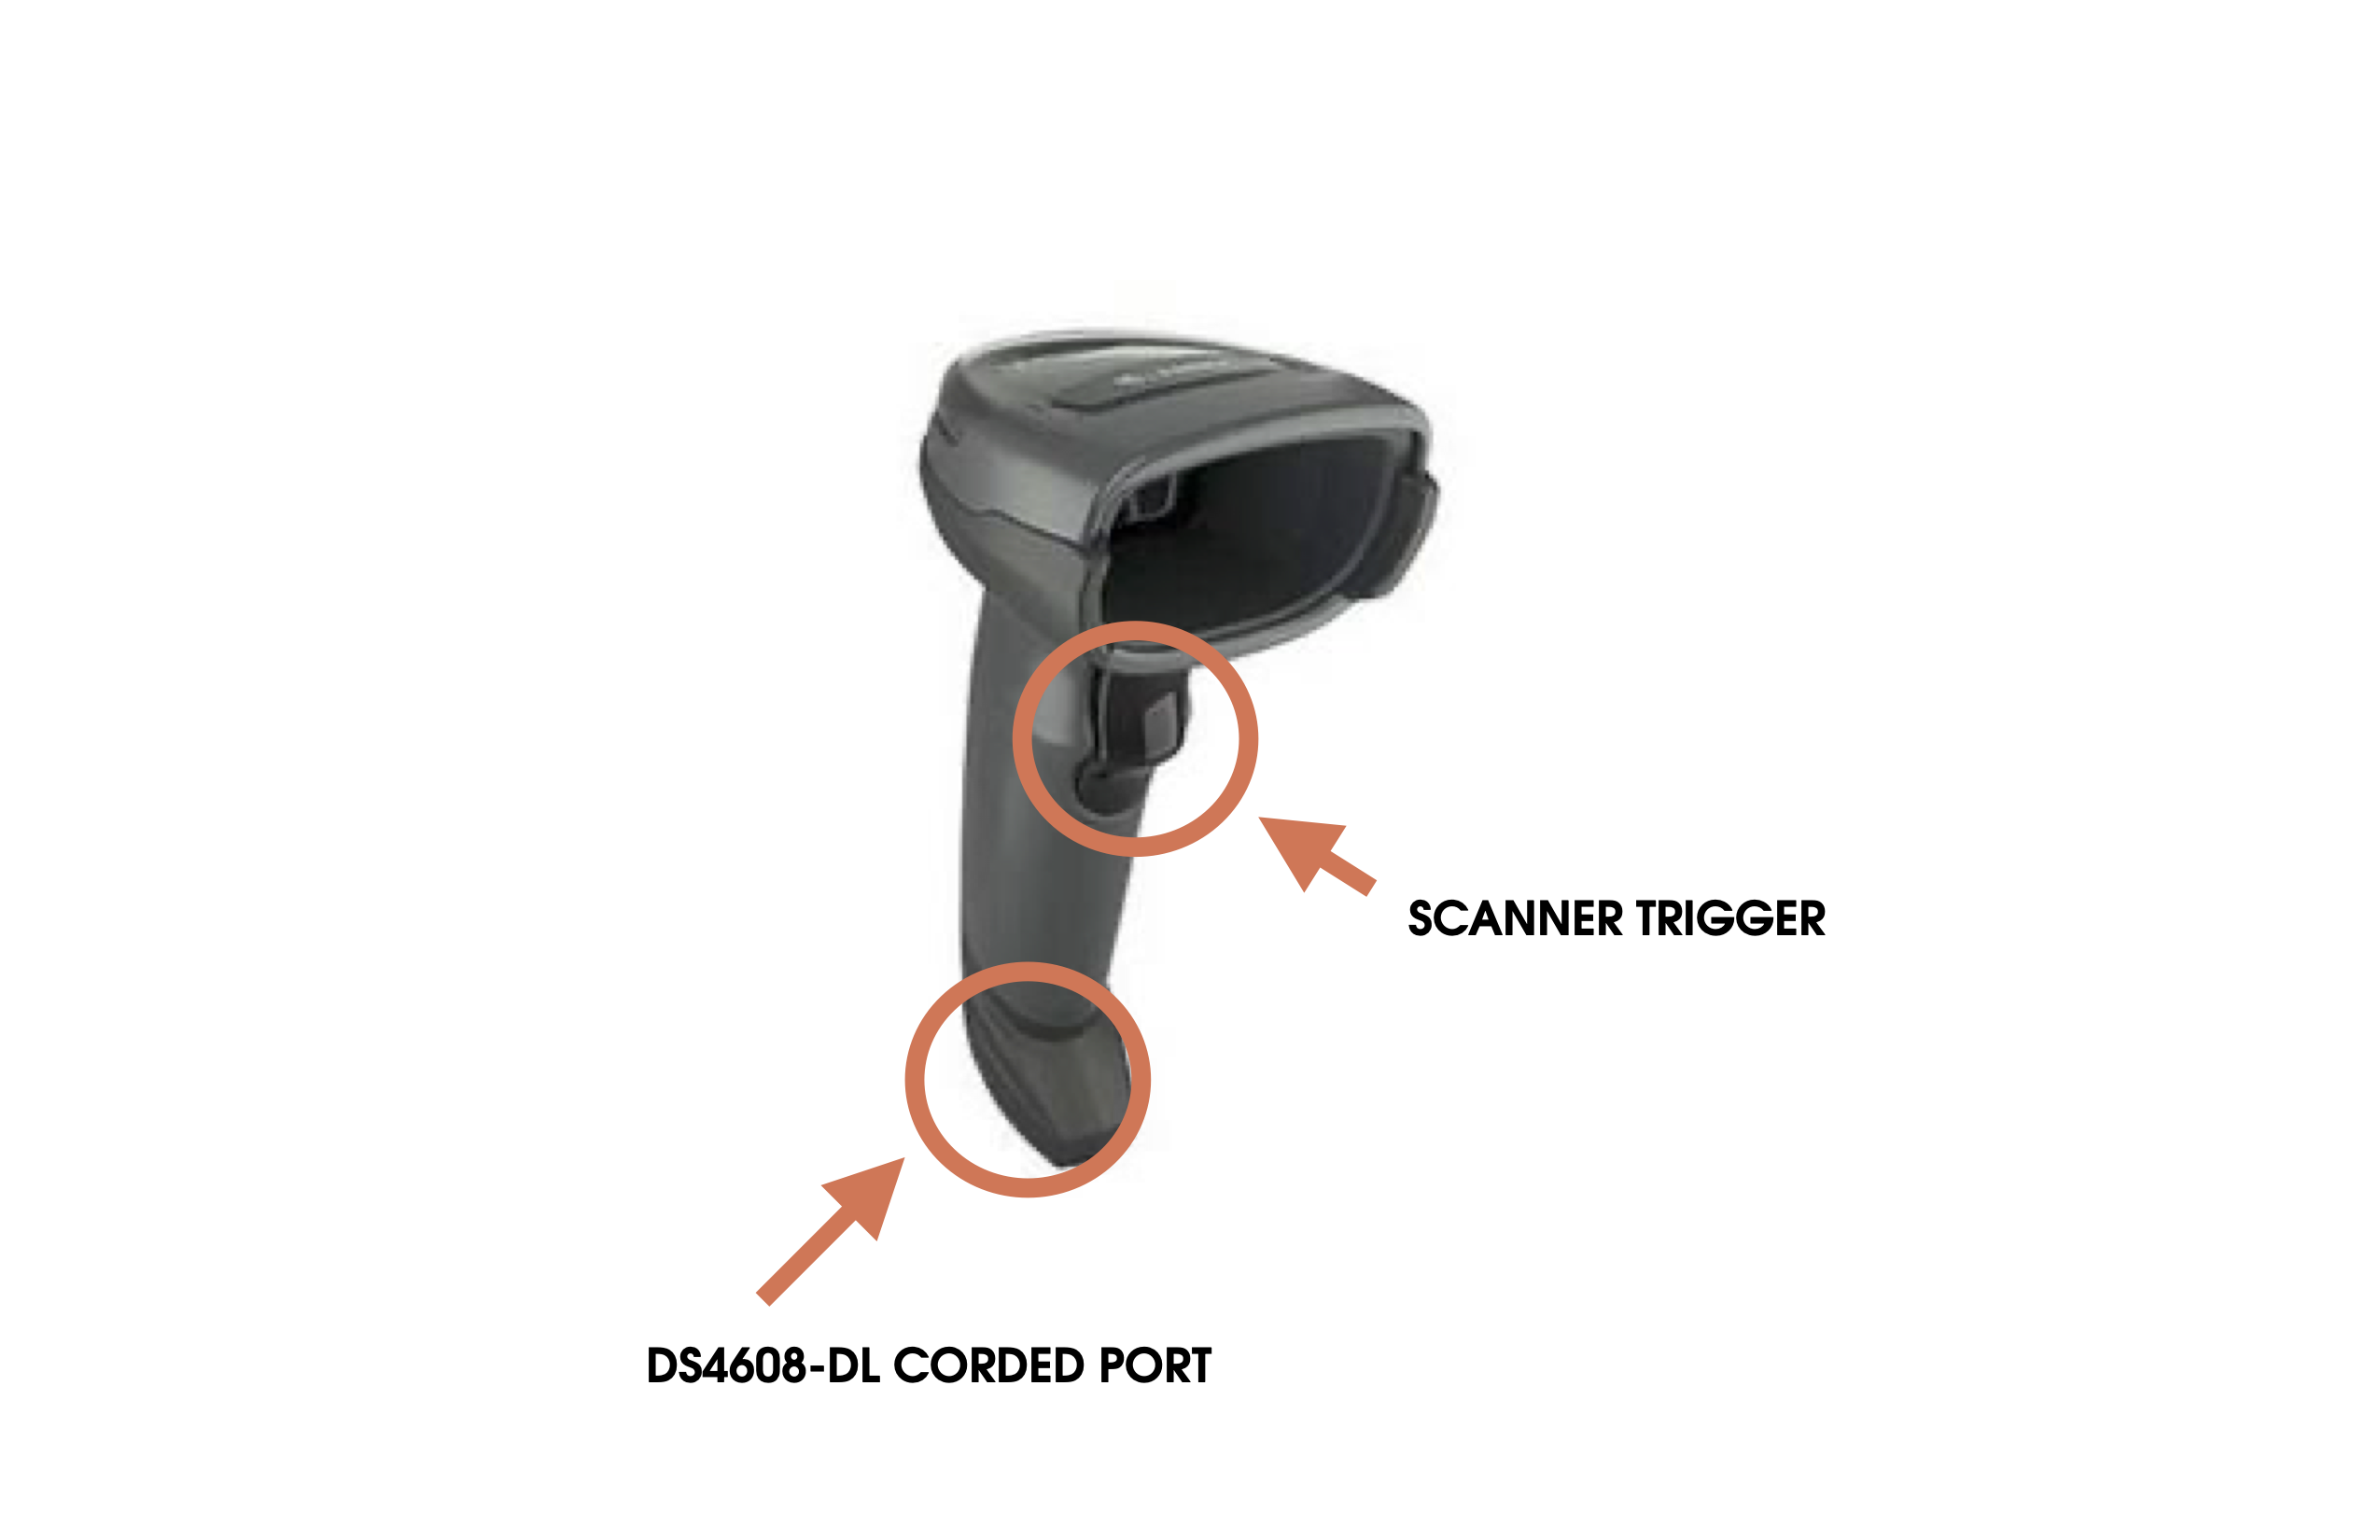 DS4608-DL corded port and scanner trigger photo